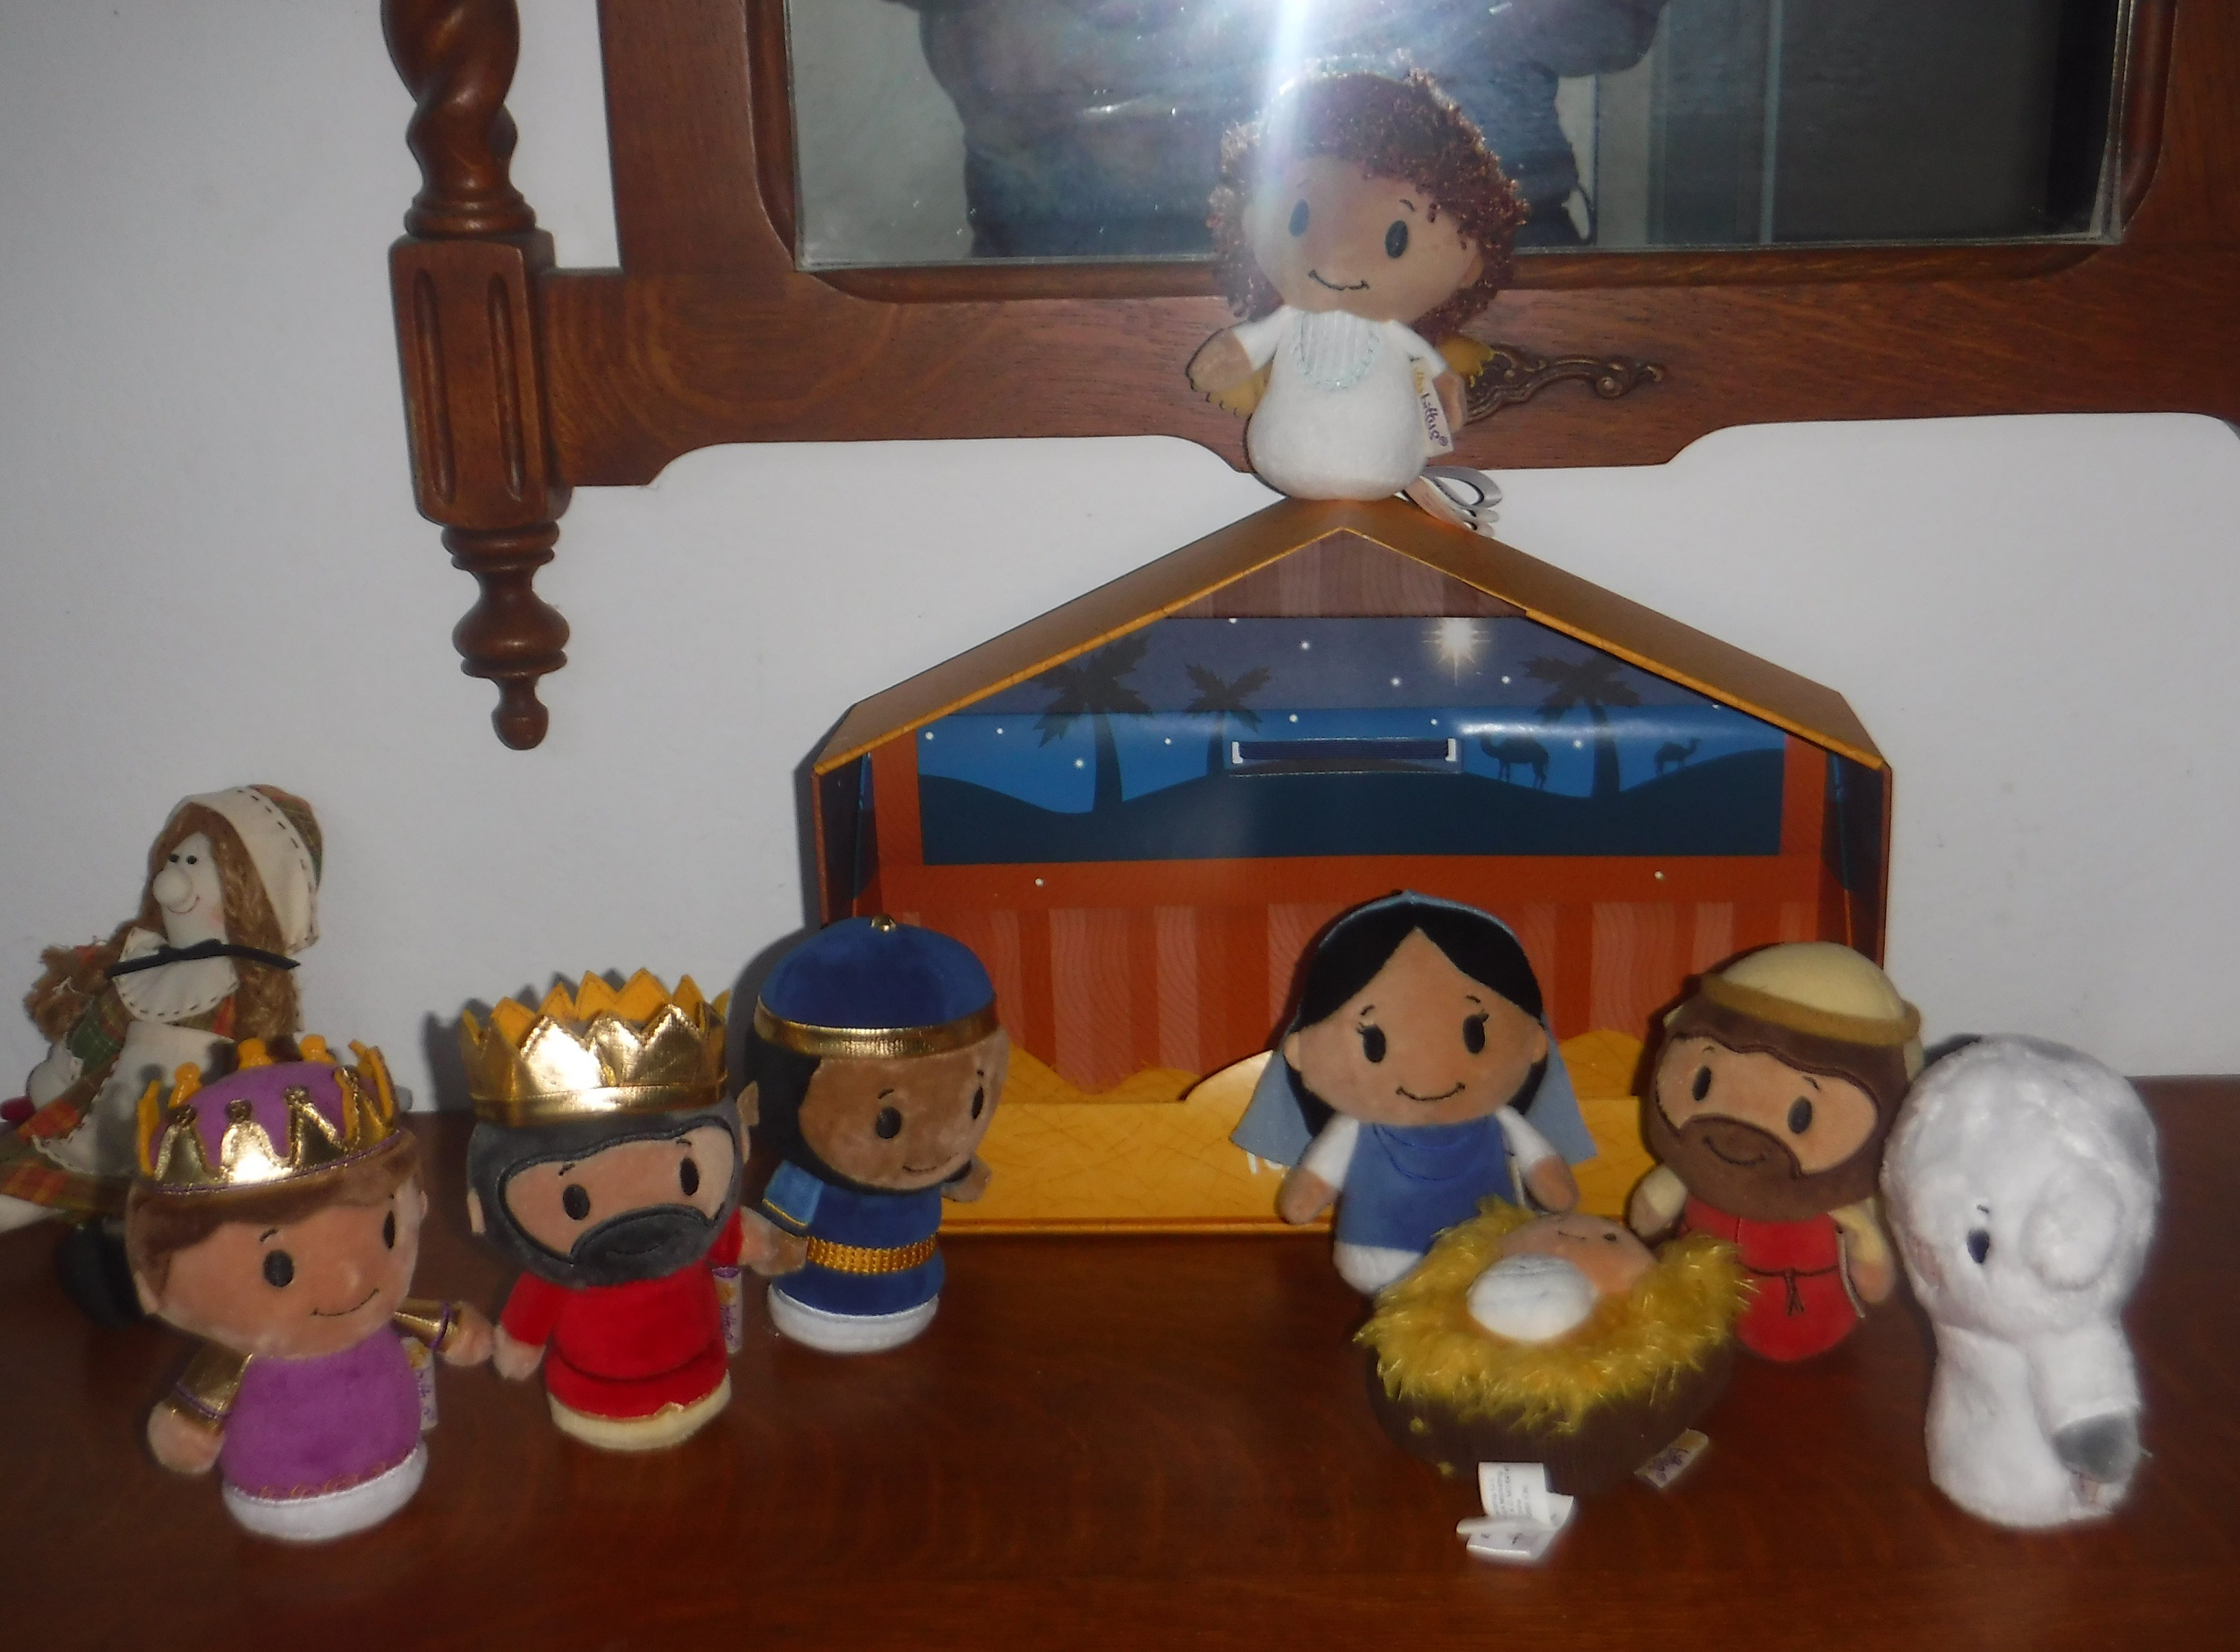 Photo taken by me of one of my Nativity sets